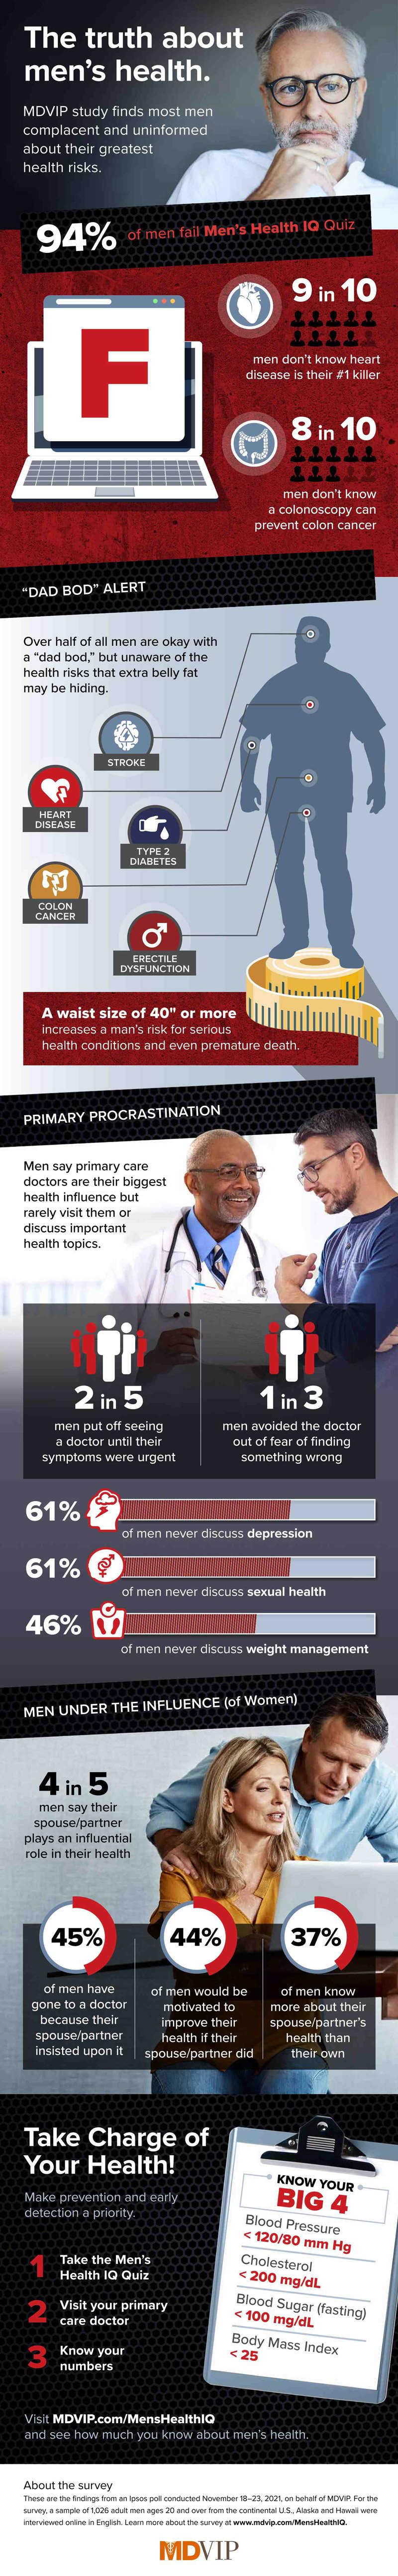 Learn about MDVIP's Men's Health Survey through this infographic.